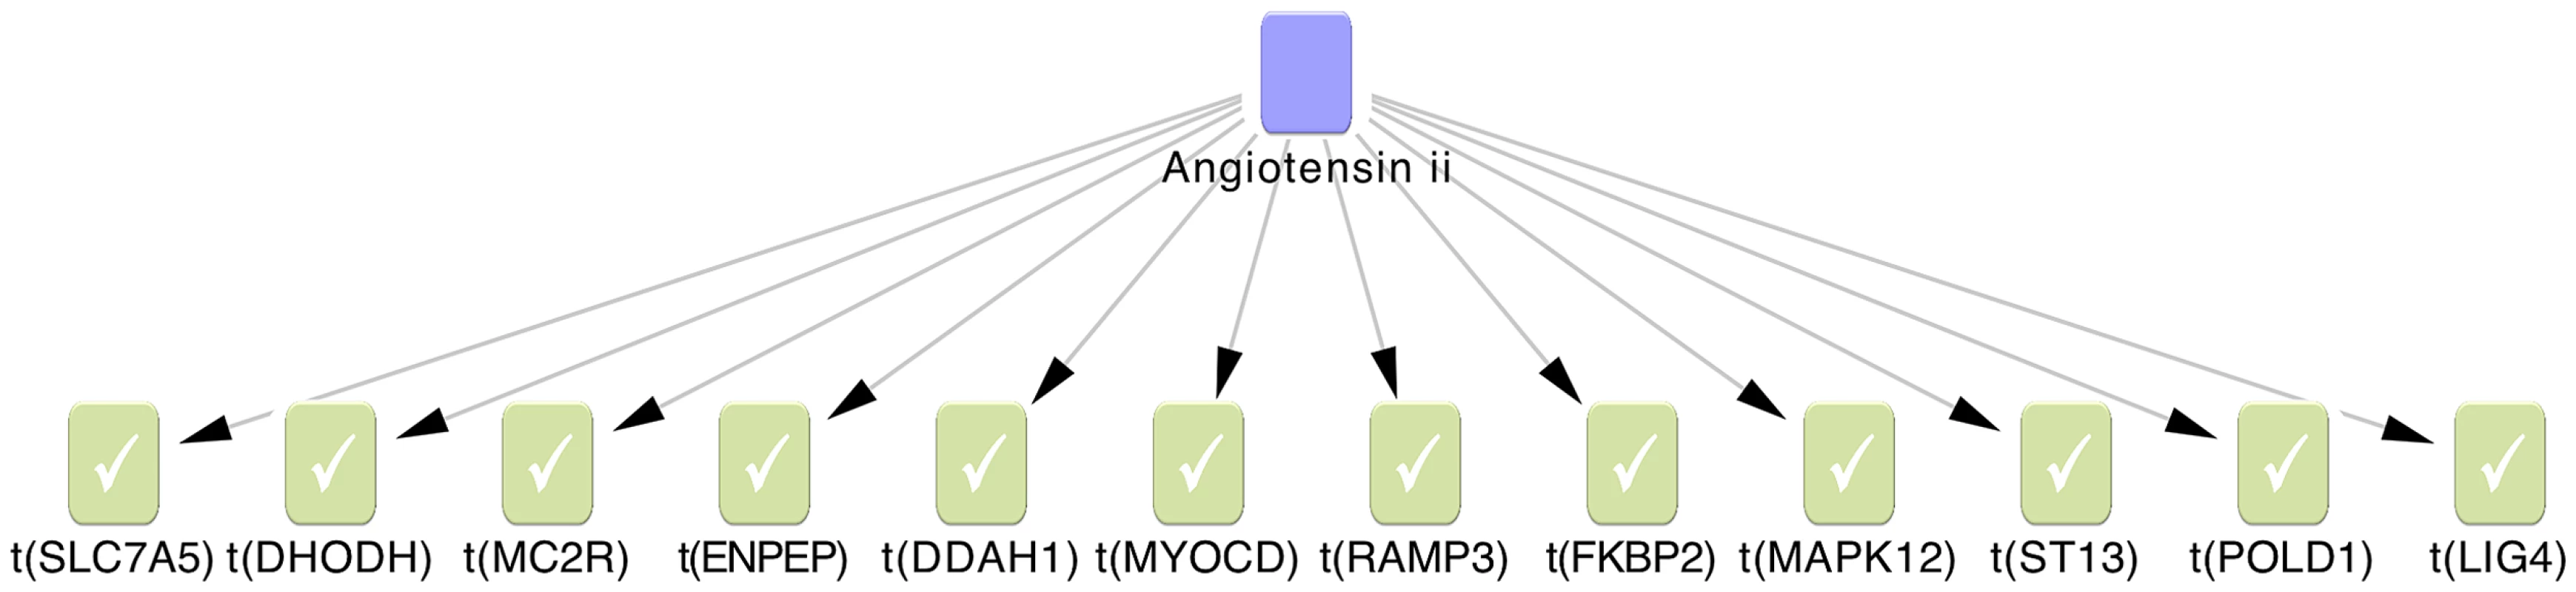 The Angiotensin II regulatory network was identified by causal reasoning from 138 genes associated with pain sensitivity.